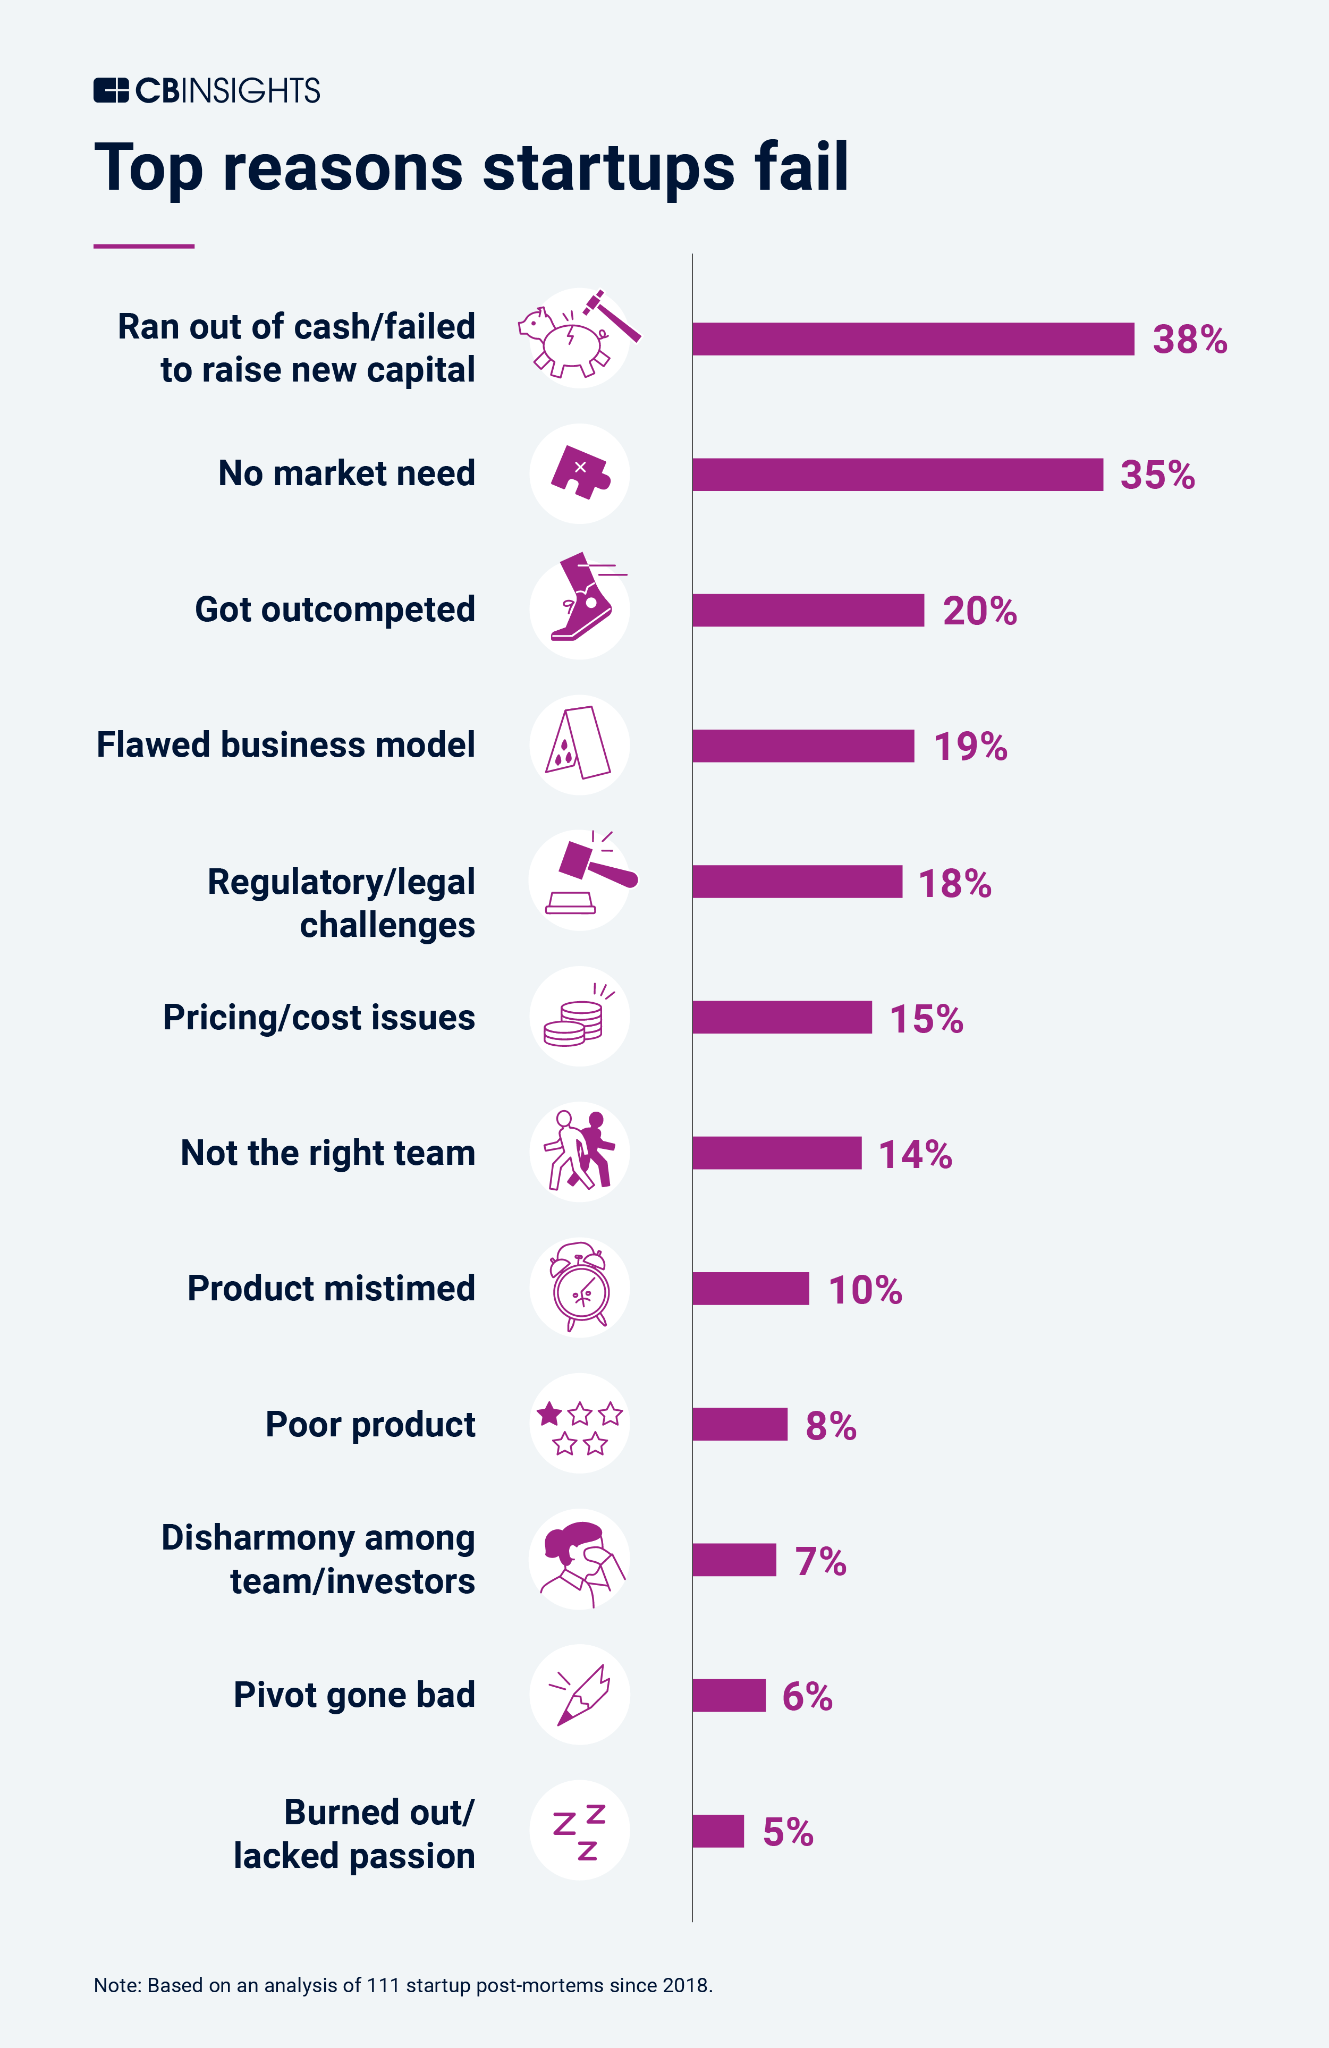 HTPTI: Infographic on the top reasons why startups fail